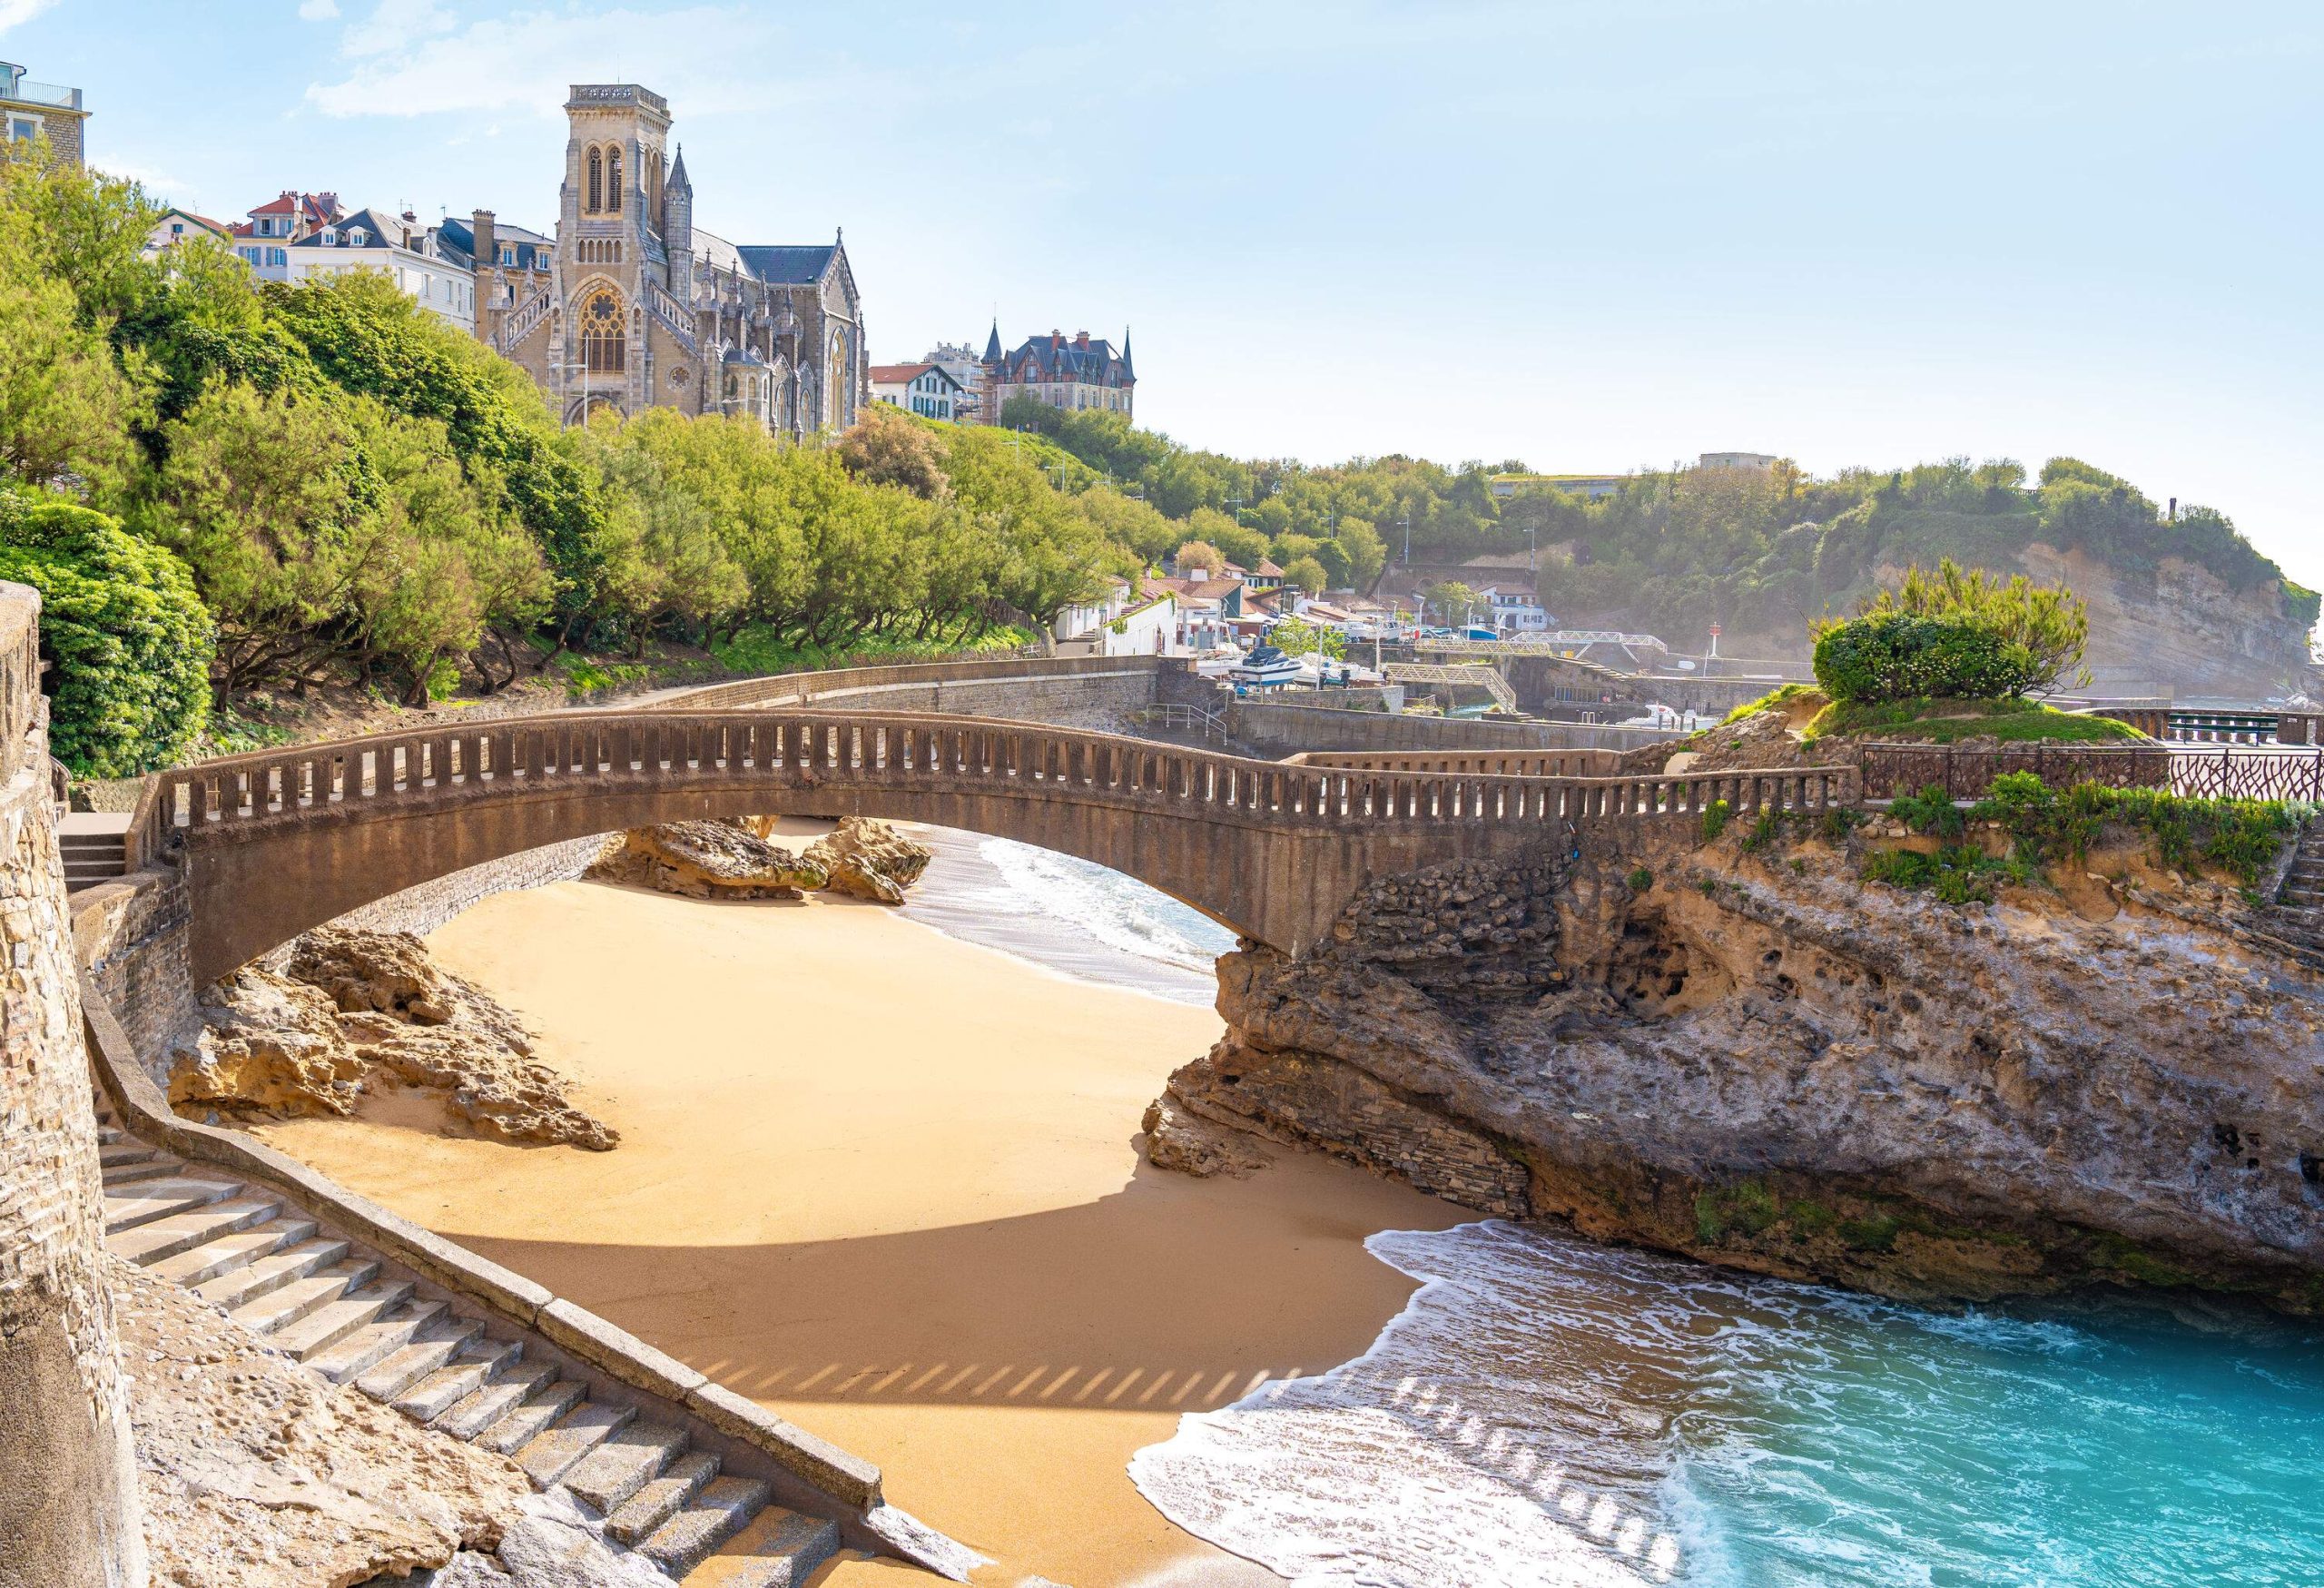 Biarritz bridge in New Aquitaine, Atlantic Pyrenees in French Basque Country of France